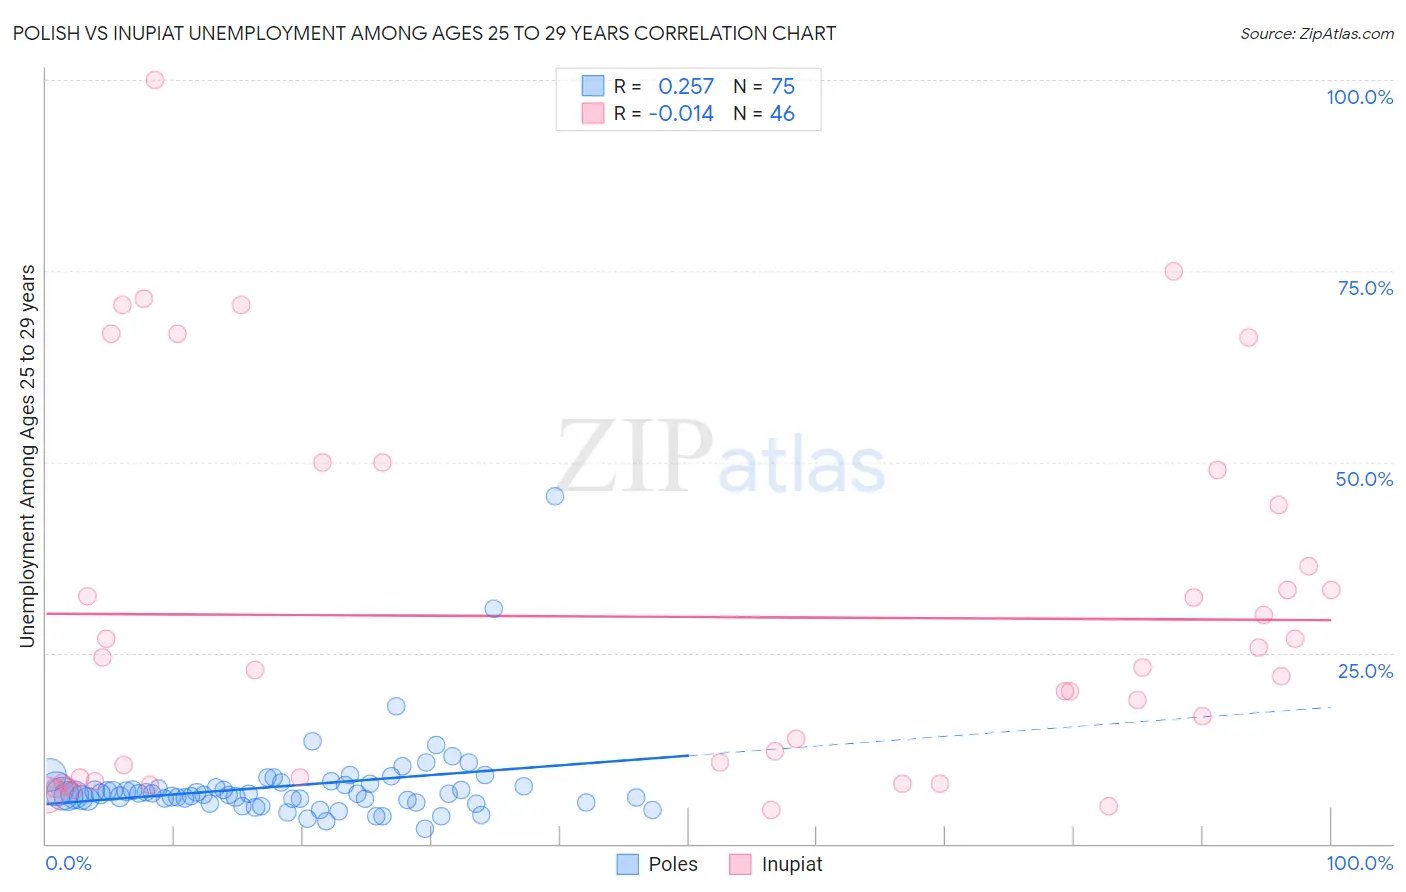 Polish vs Inupiat Unemployment Among Ages 25 to 29 years